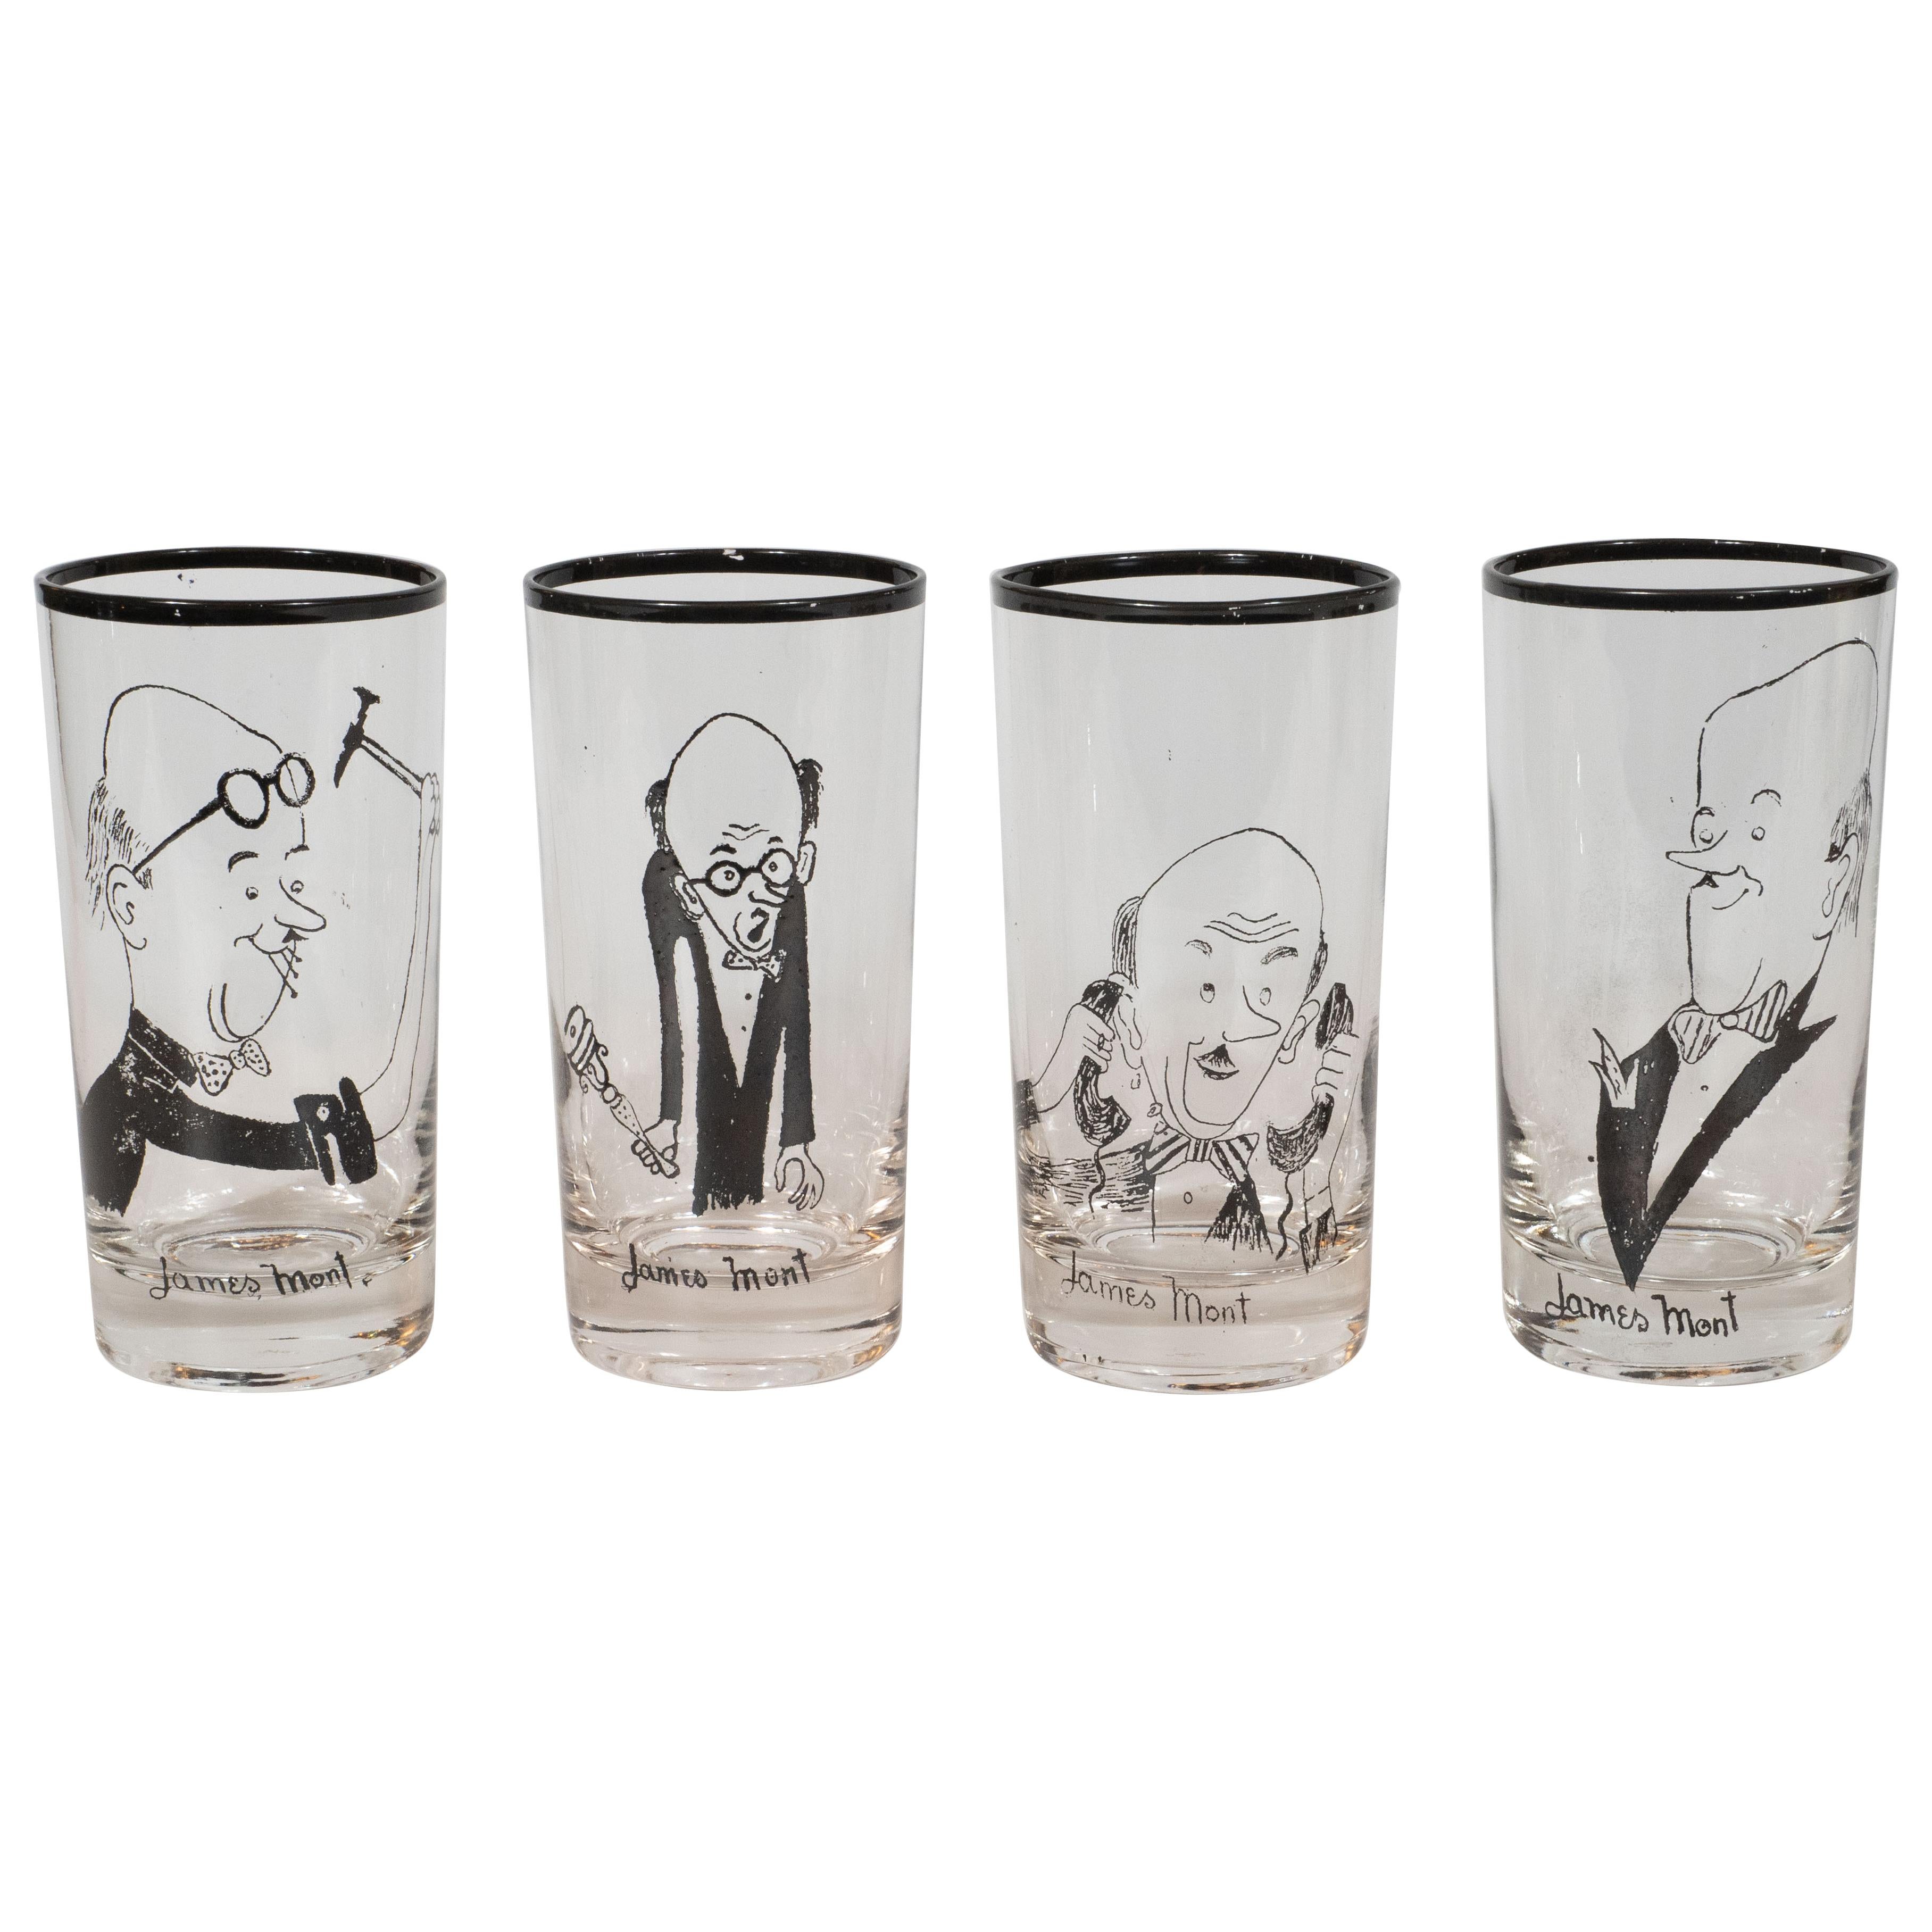 This whimsical and sophisticated set of James Mont glasses were realized by James Mont, circa 1960. Realized in translucent glass, these water glasses feature four unique hand drawn cartoons of the designer in caricature. On one of the glasses, he